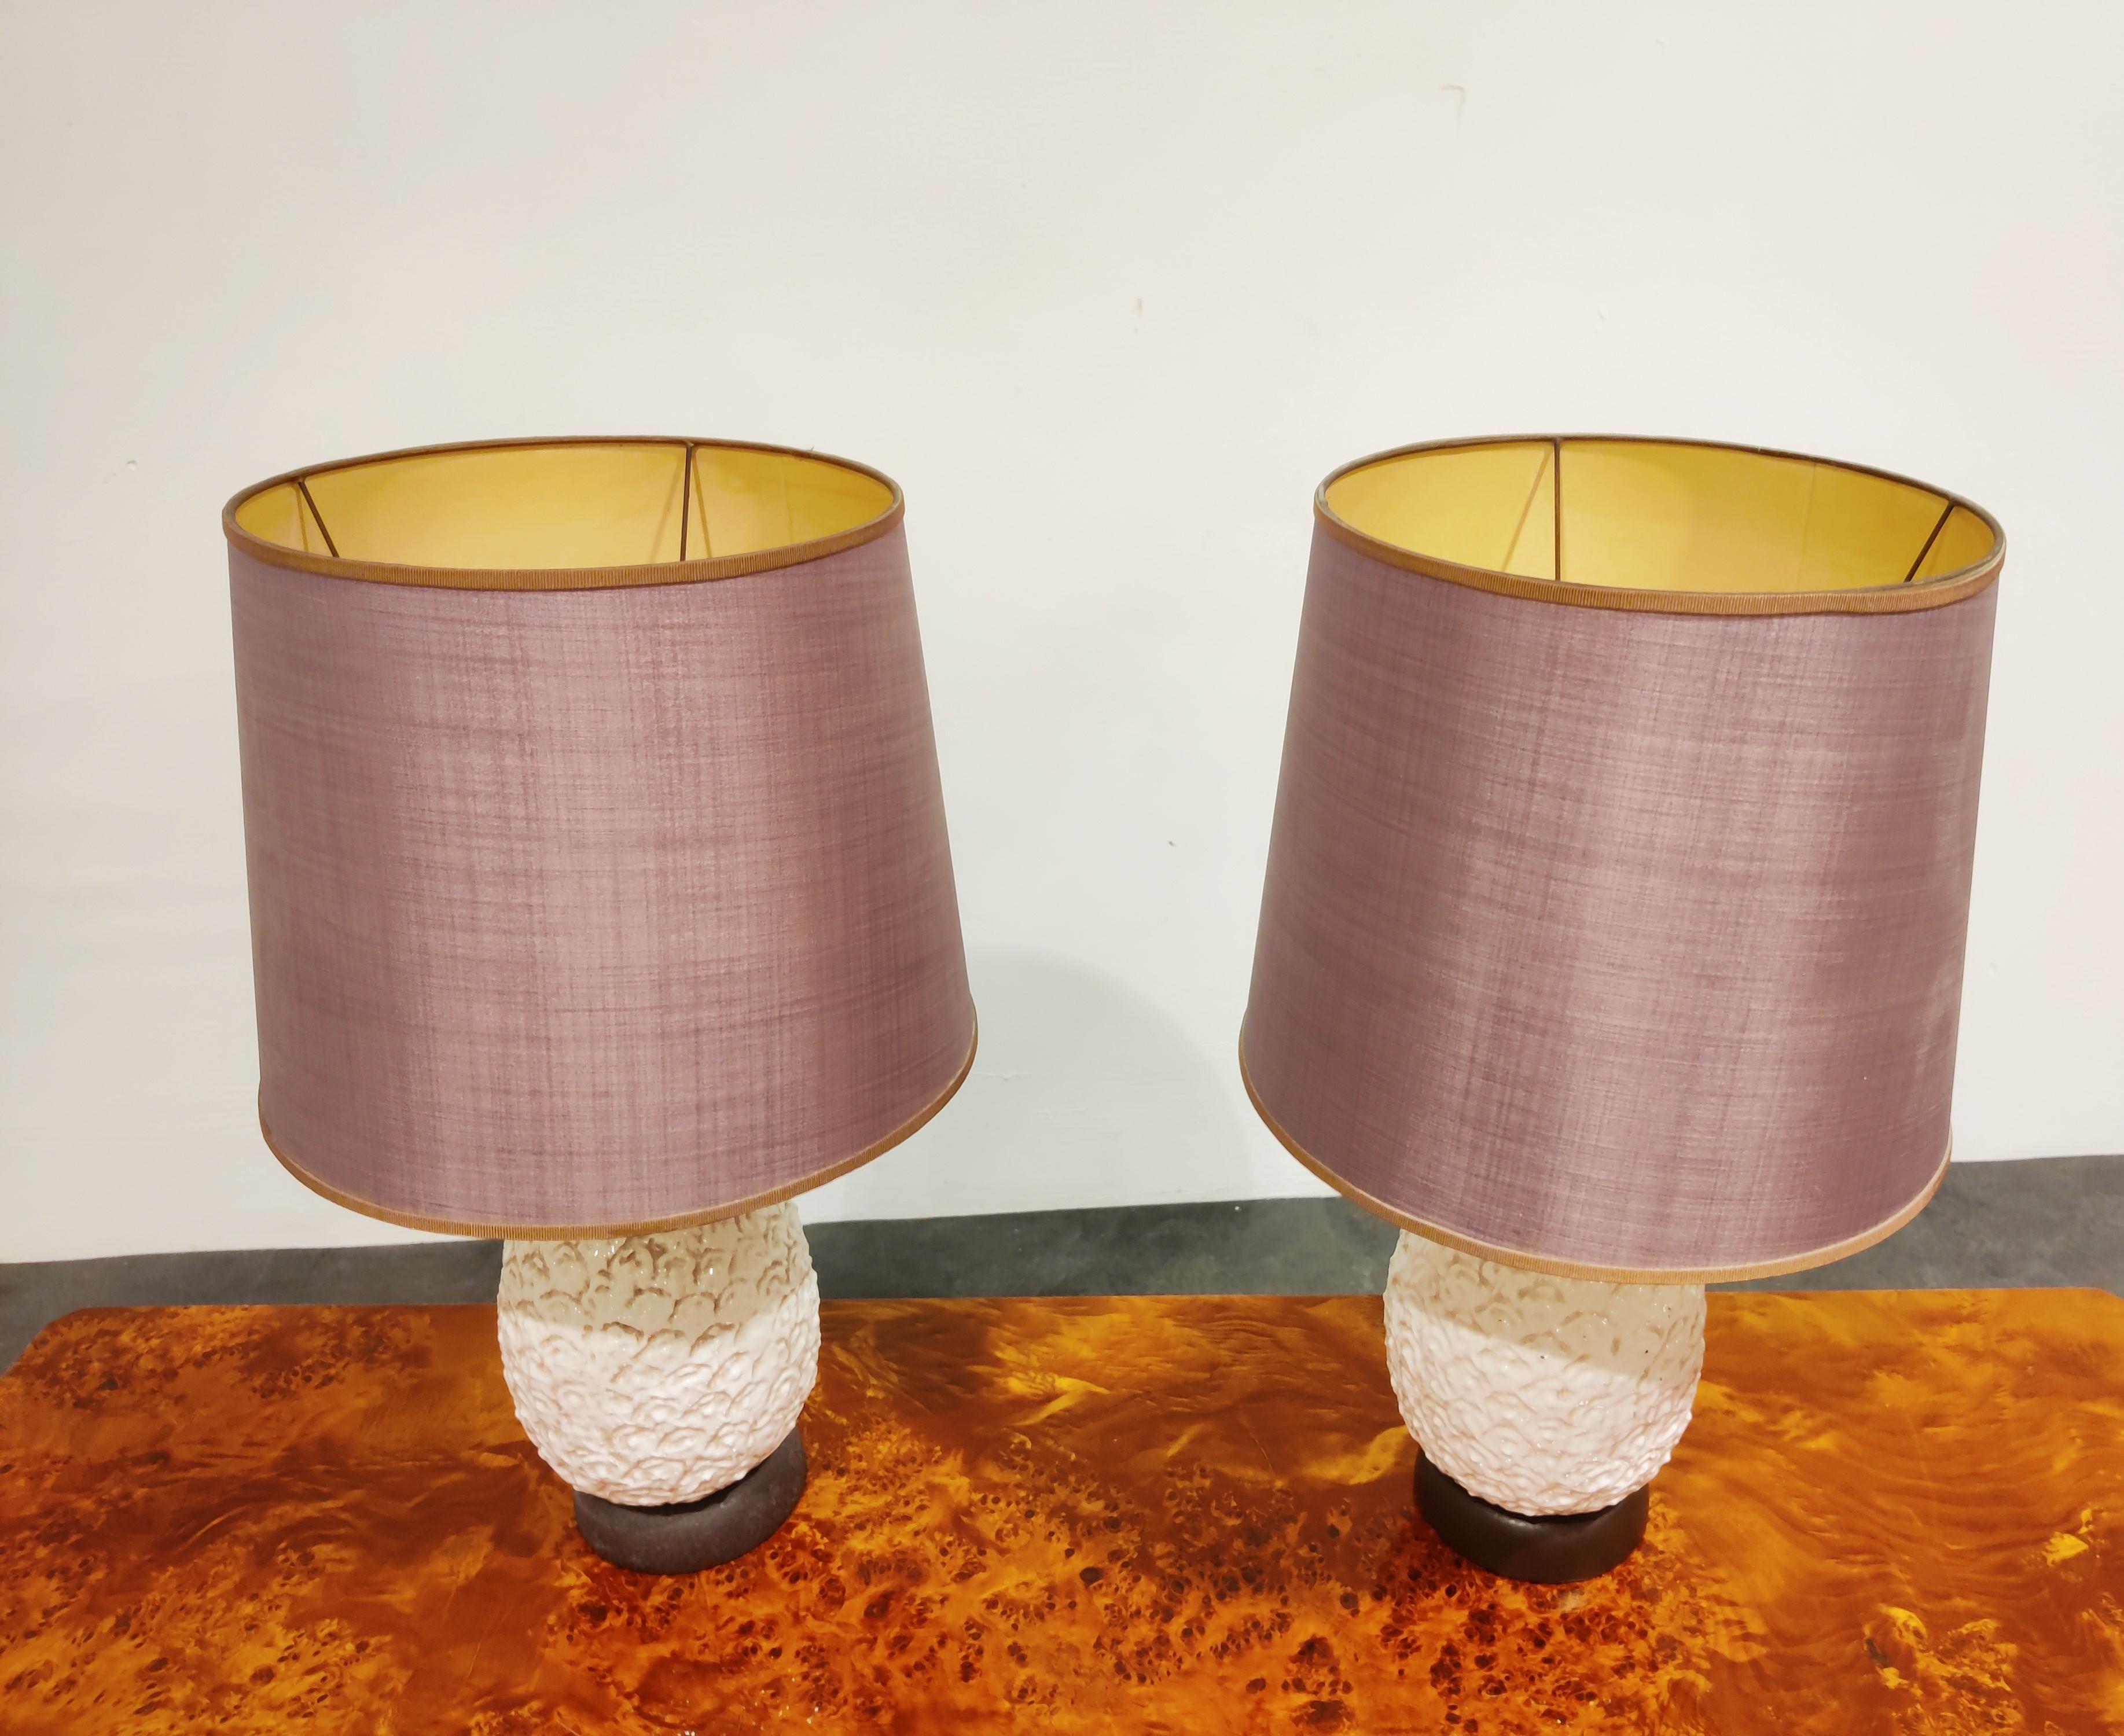 Pair of charming midcentury ceramic pineapple table lamps.

These beautiful handmade lamps come with their original purple lamp shades which give a soft light.

Good, tested and ready to use with a regular E27 light bulb.

Brown traces on the